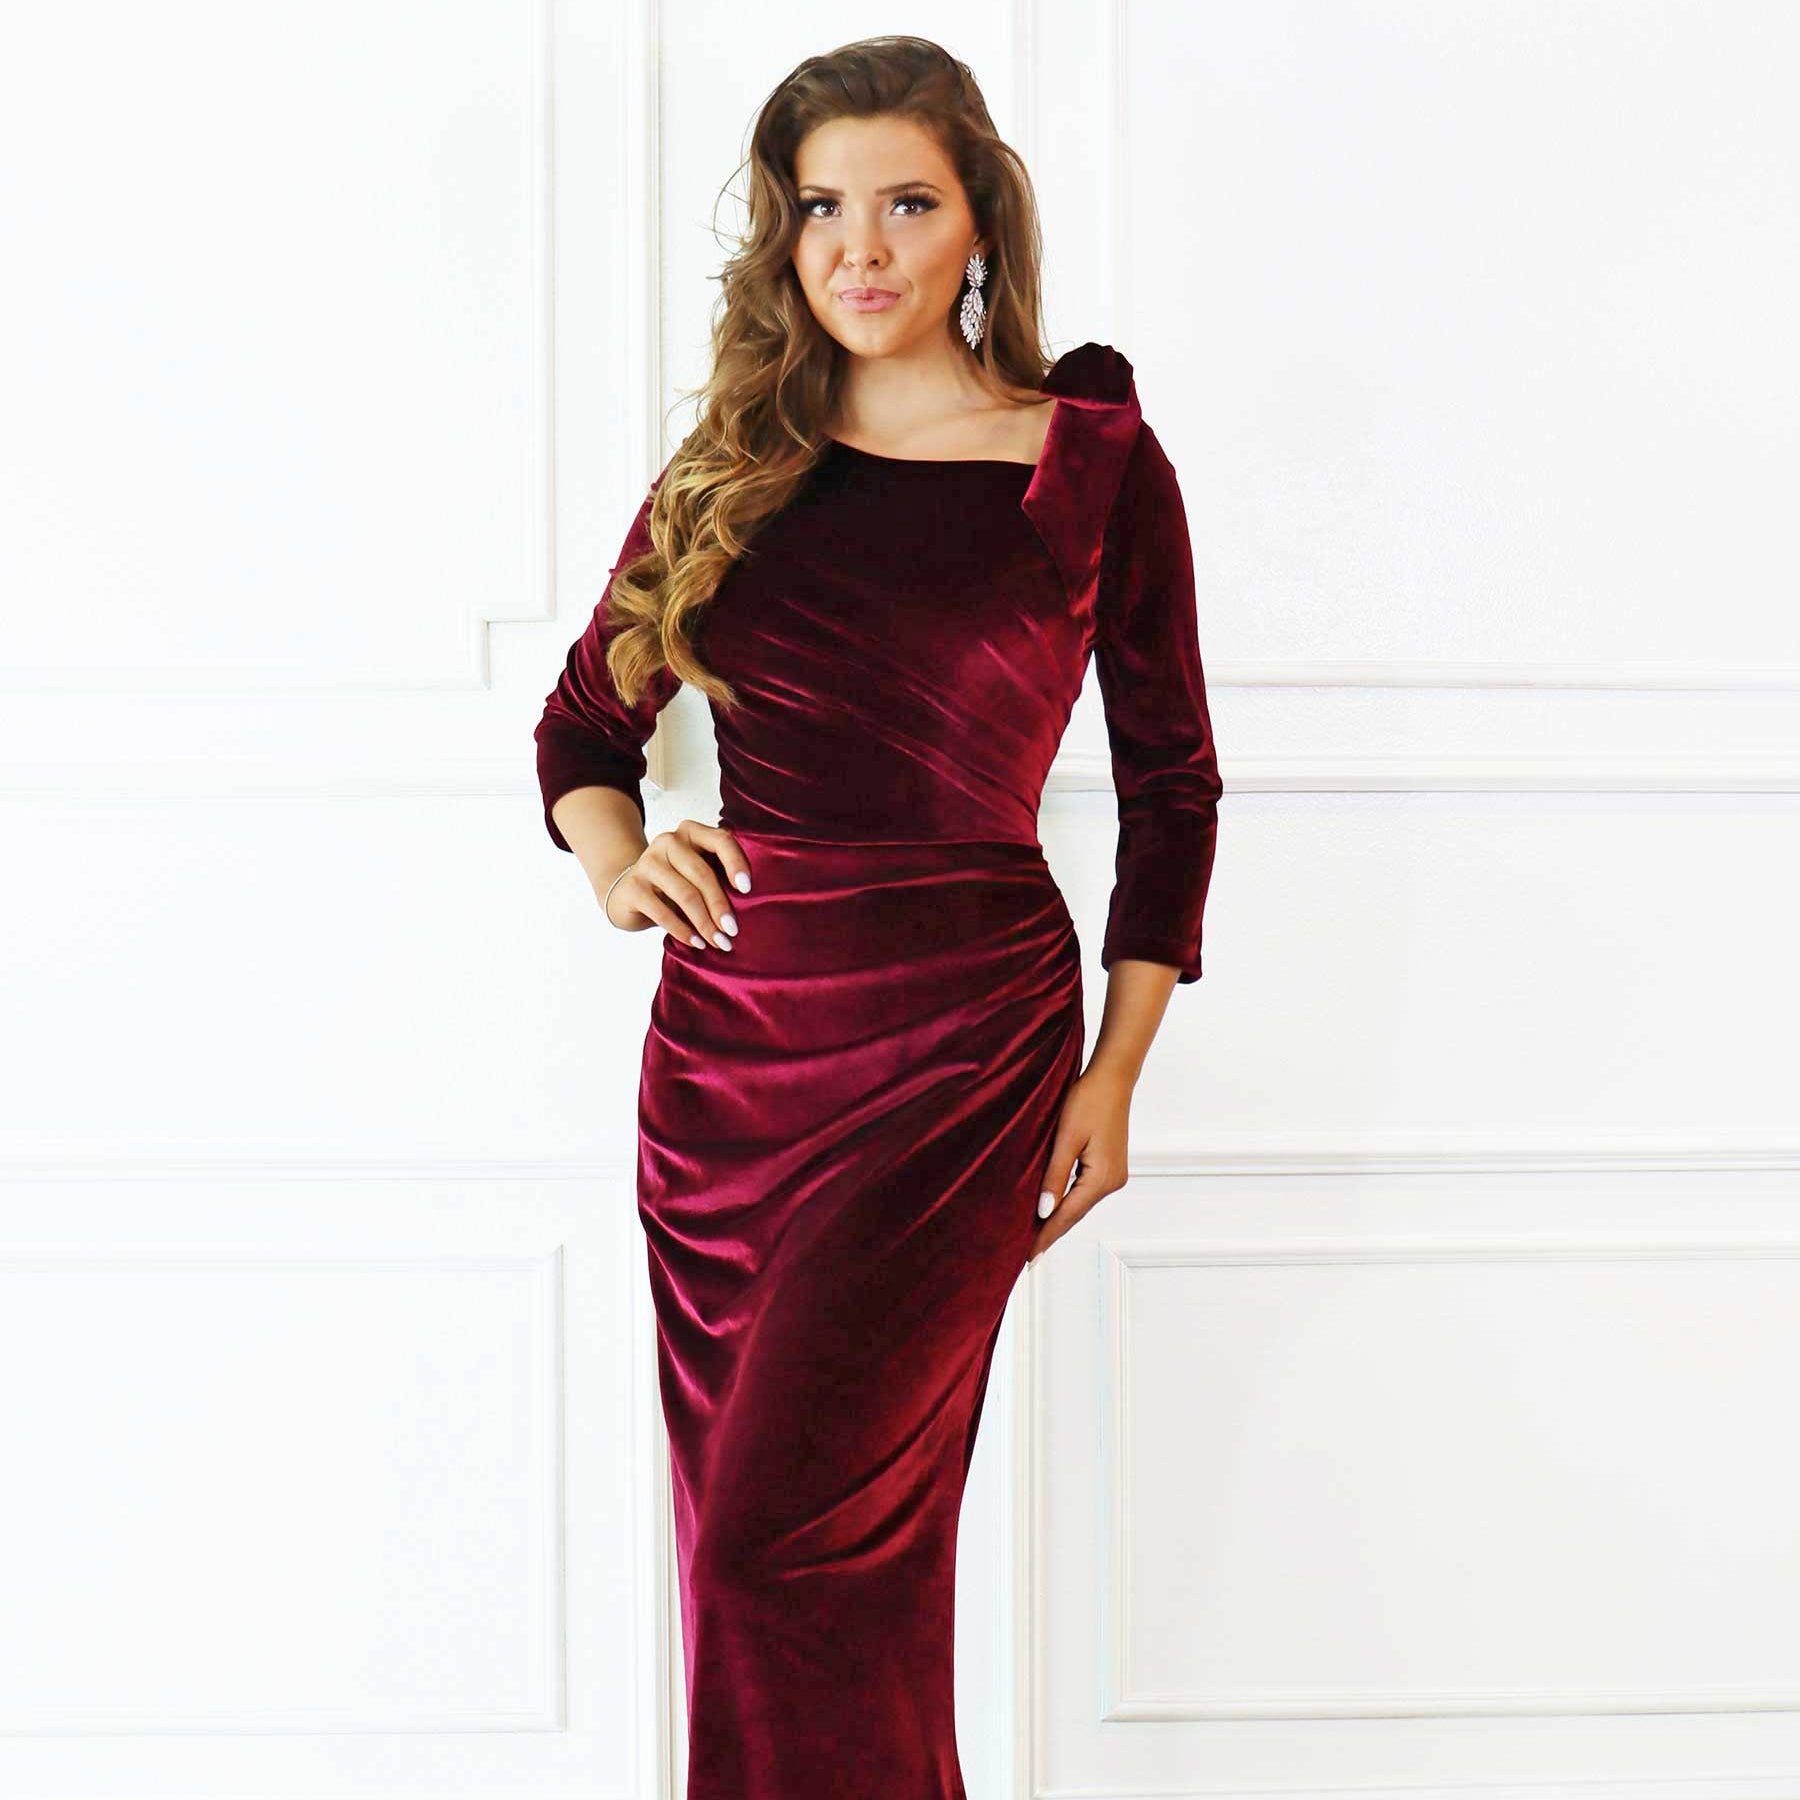 Mia Bella Couture - Formal dresses prom dresses and bridal gowns